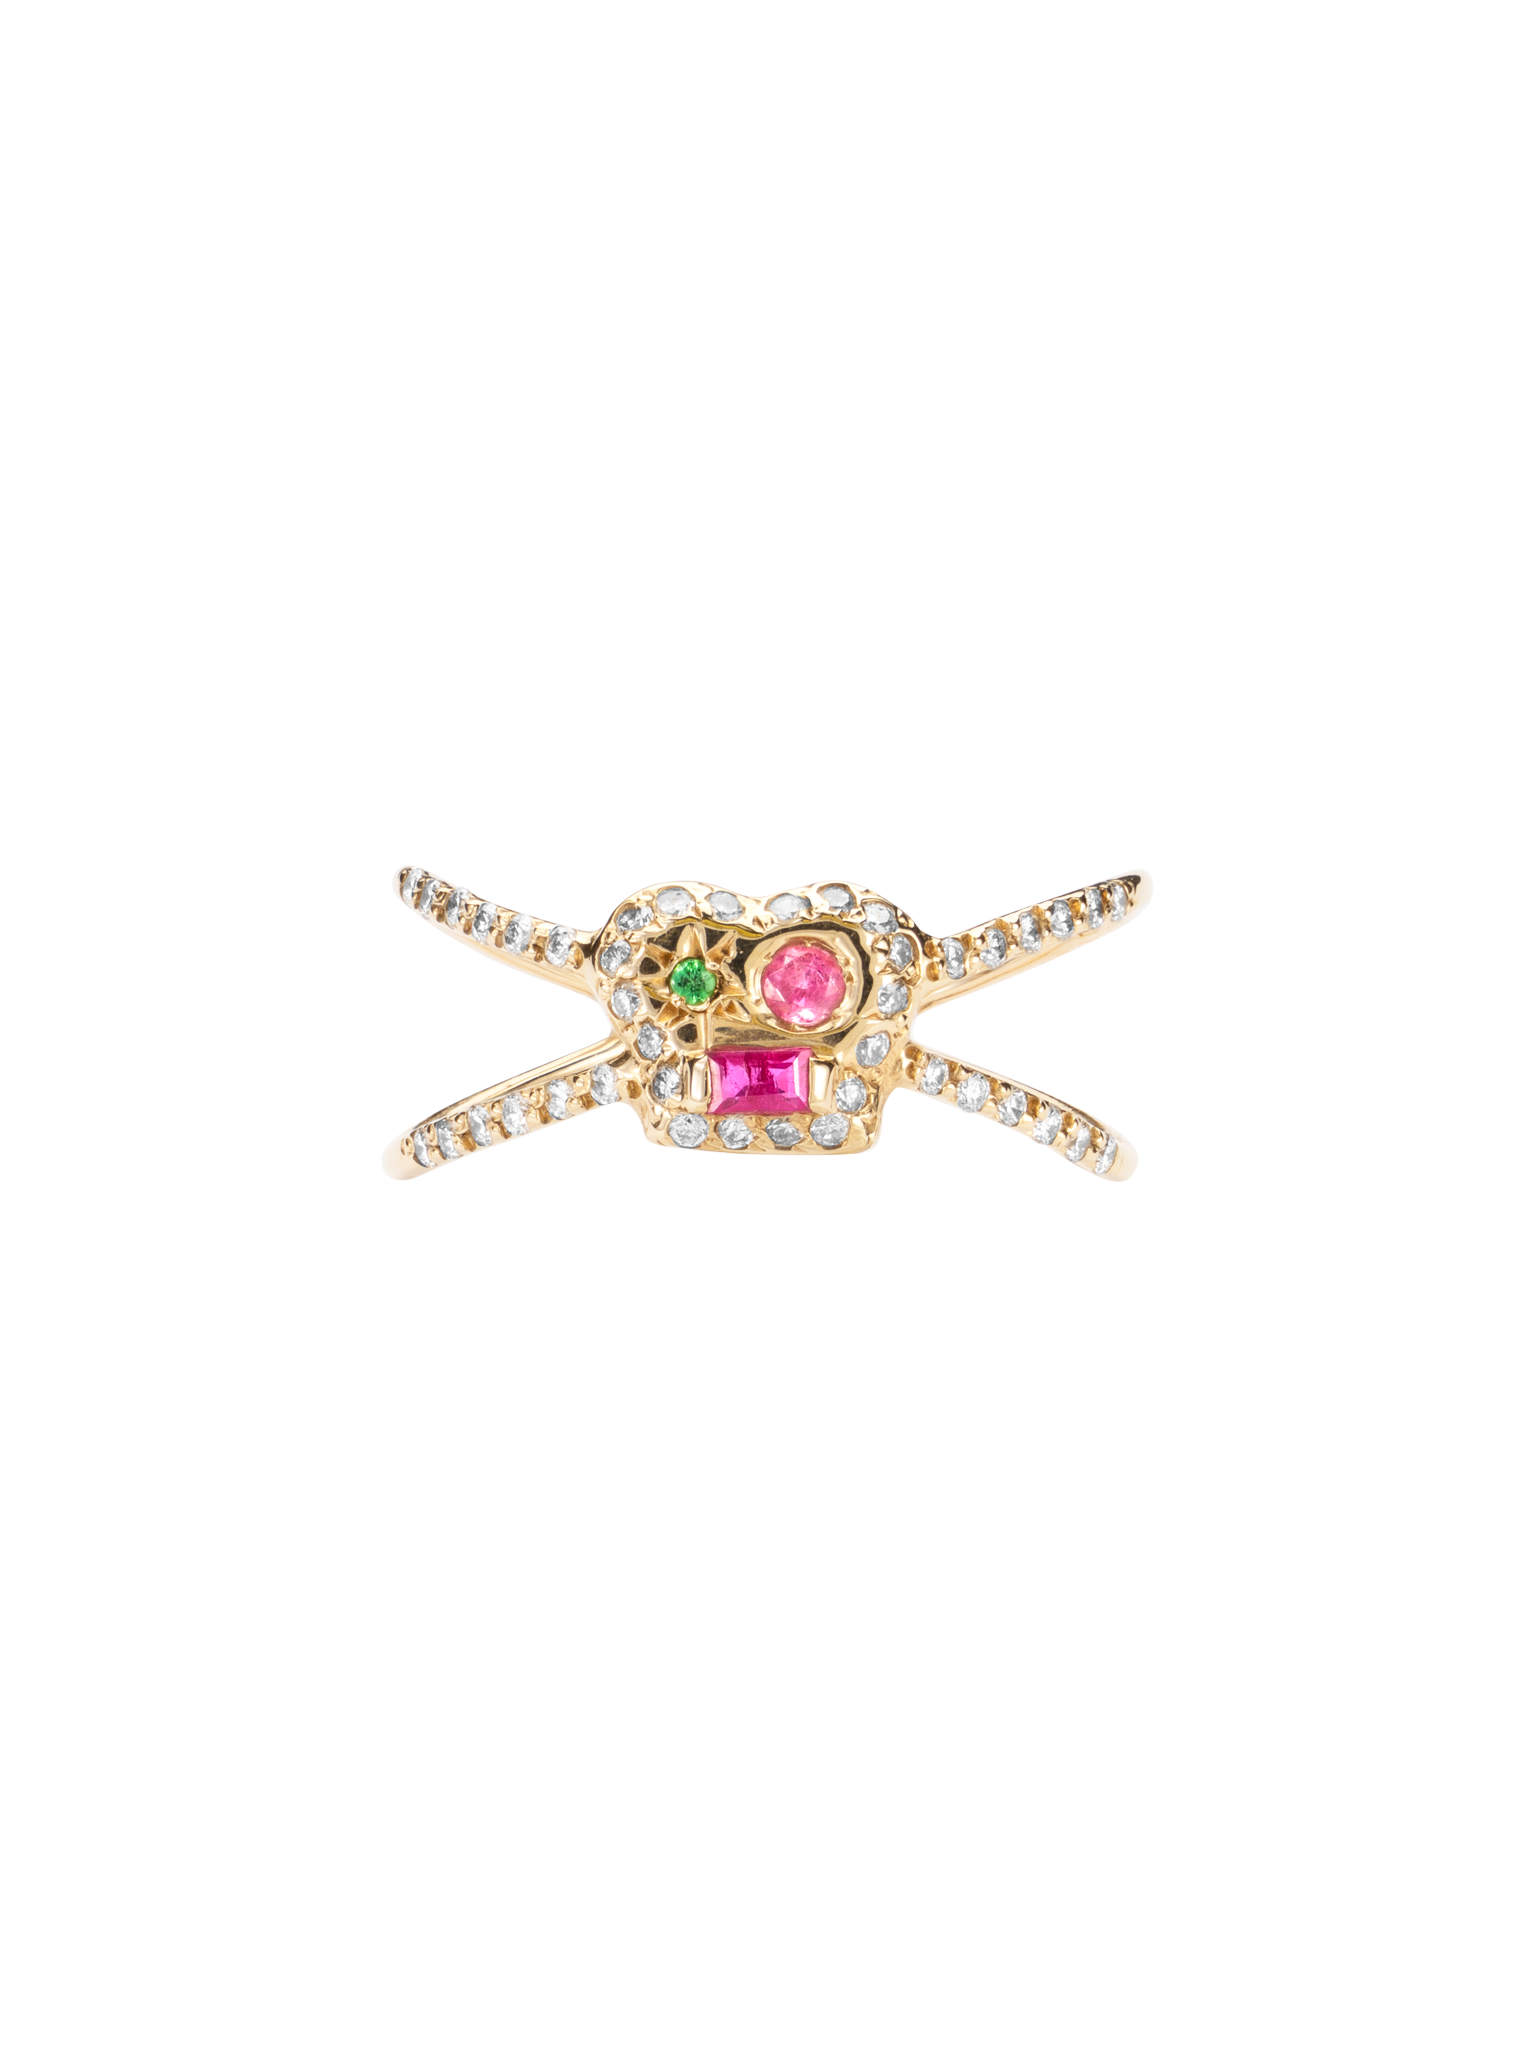 The max ring with mixed gems